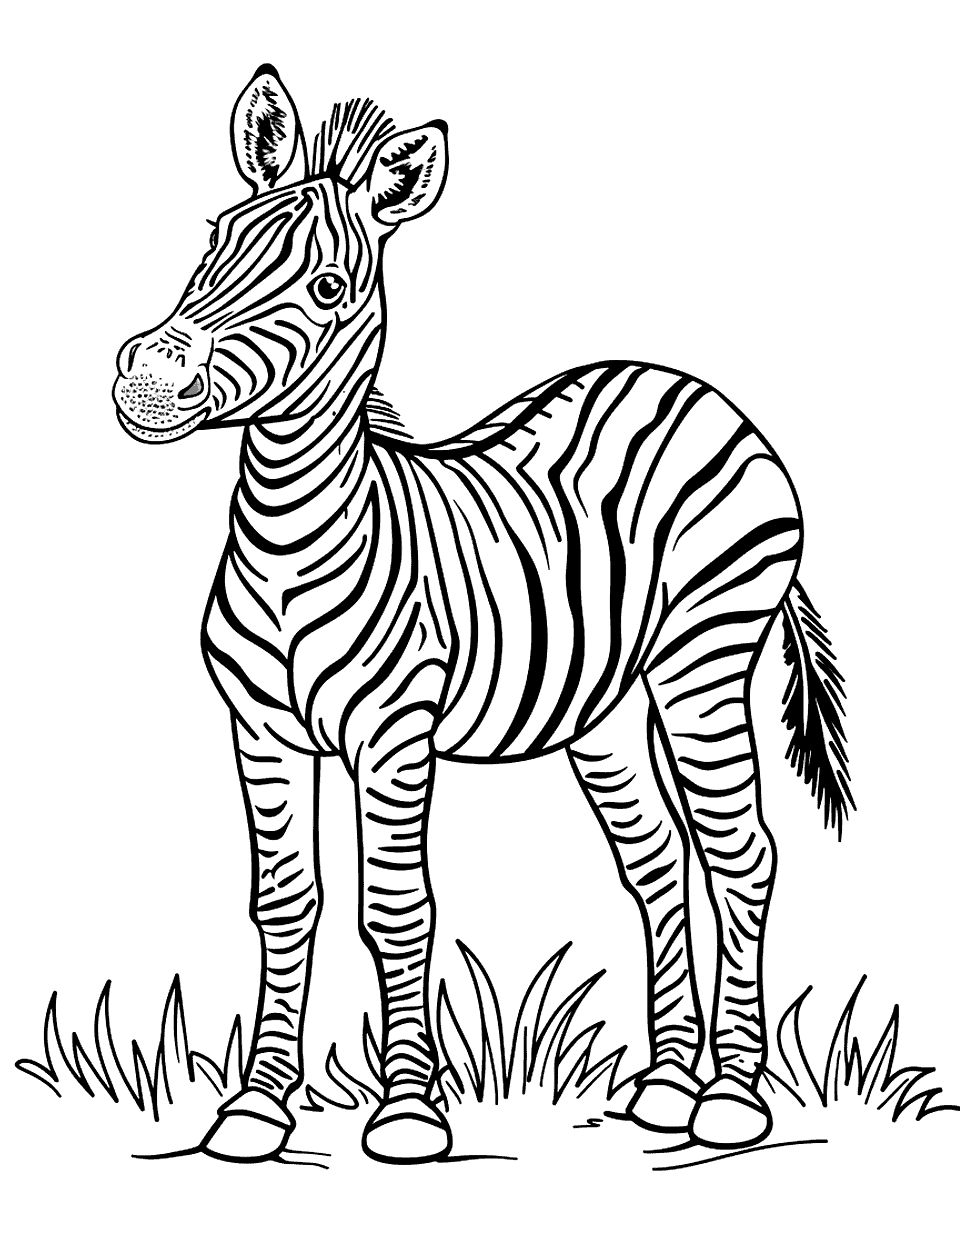 Alert Zebra Coloring Page - A zebra standing alert with ears pricked up.